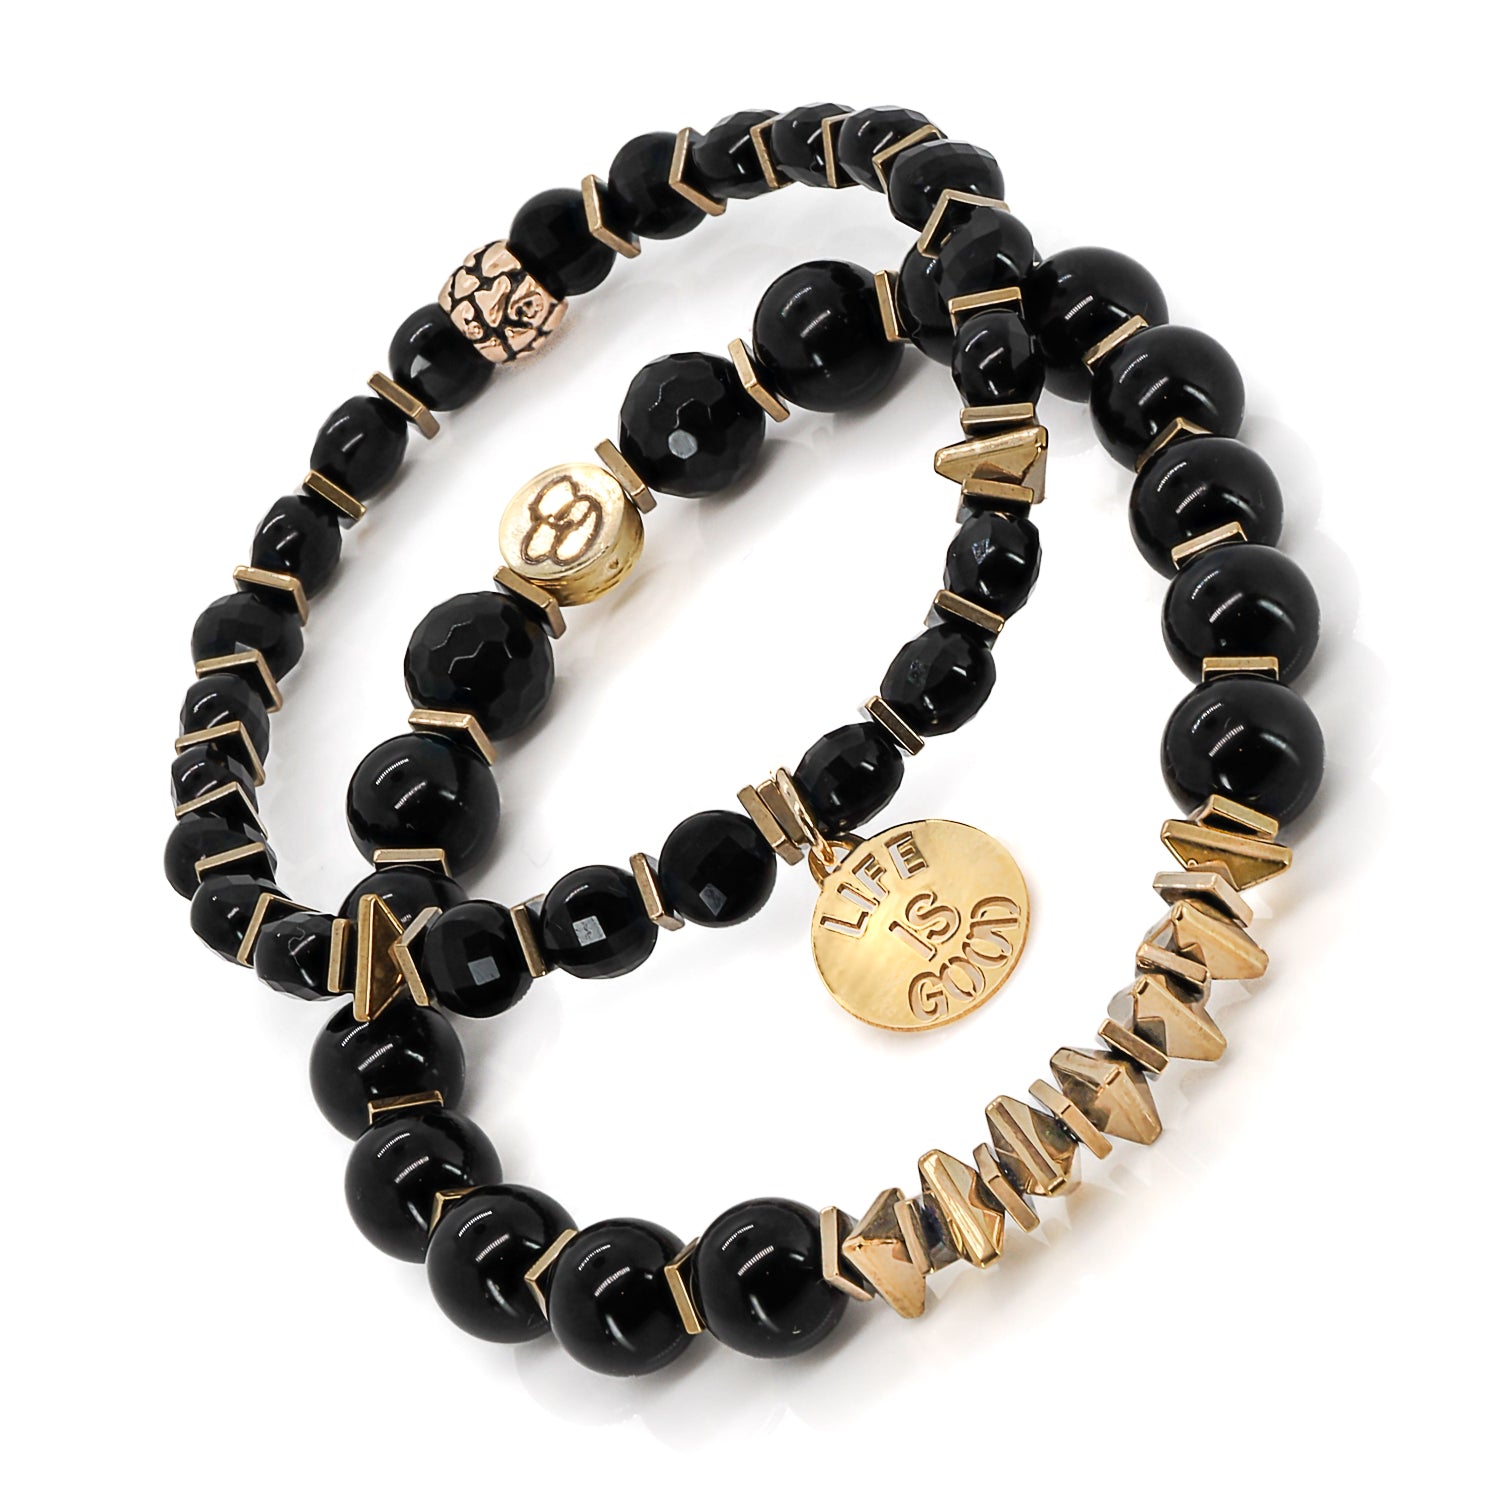 Transform with Grace: Black Onyx Bracelet Set with Protective Energy and Gold Accents